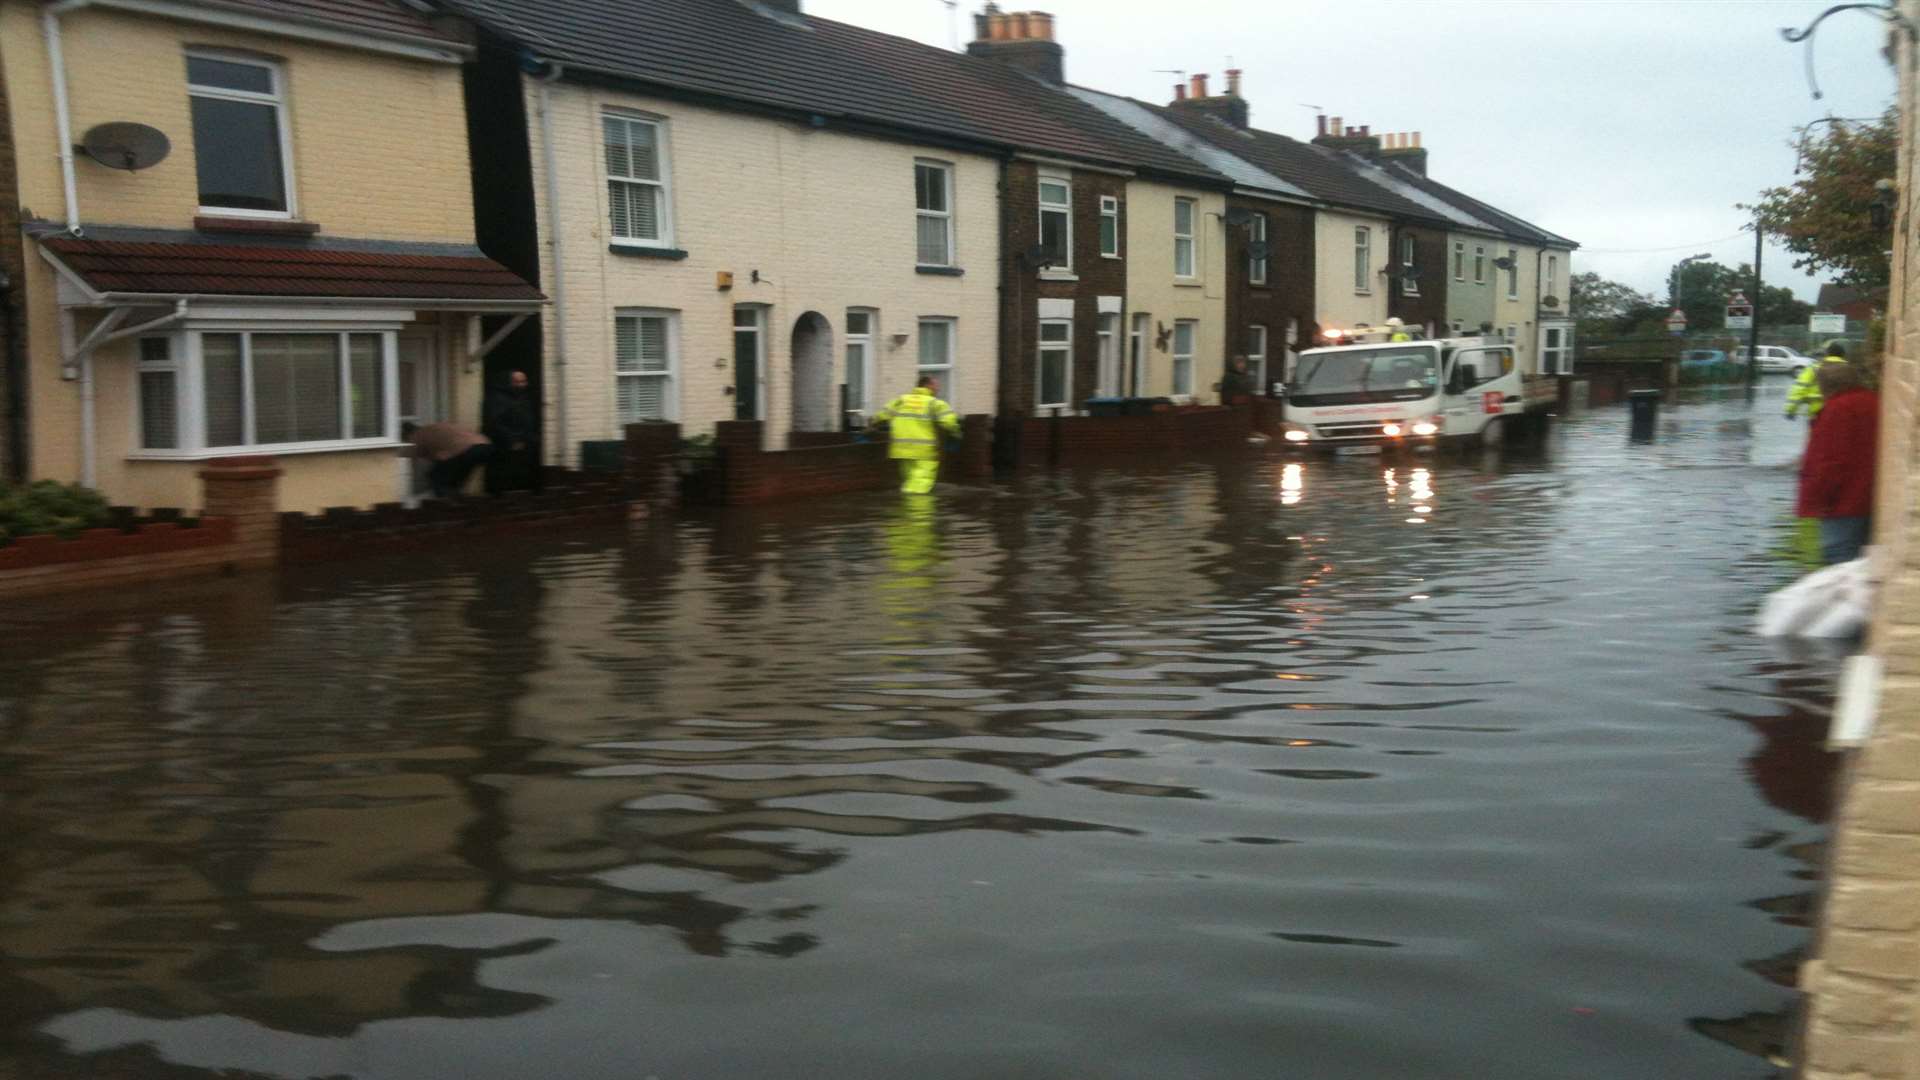 This picture taken by Nick Cavell shows Albert Road's flooding when heavy rain falls.